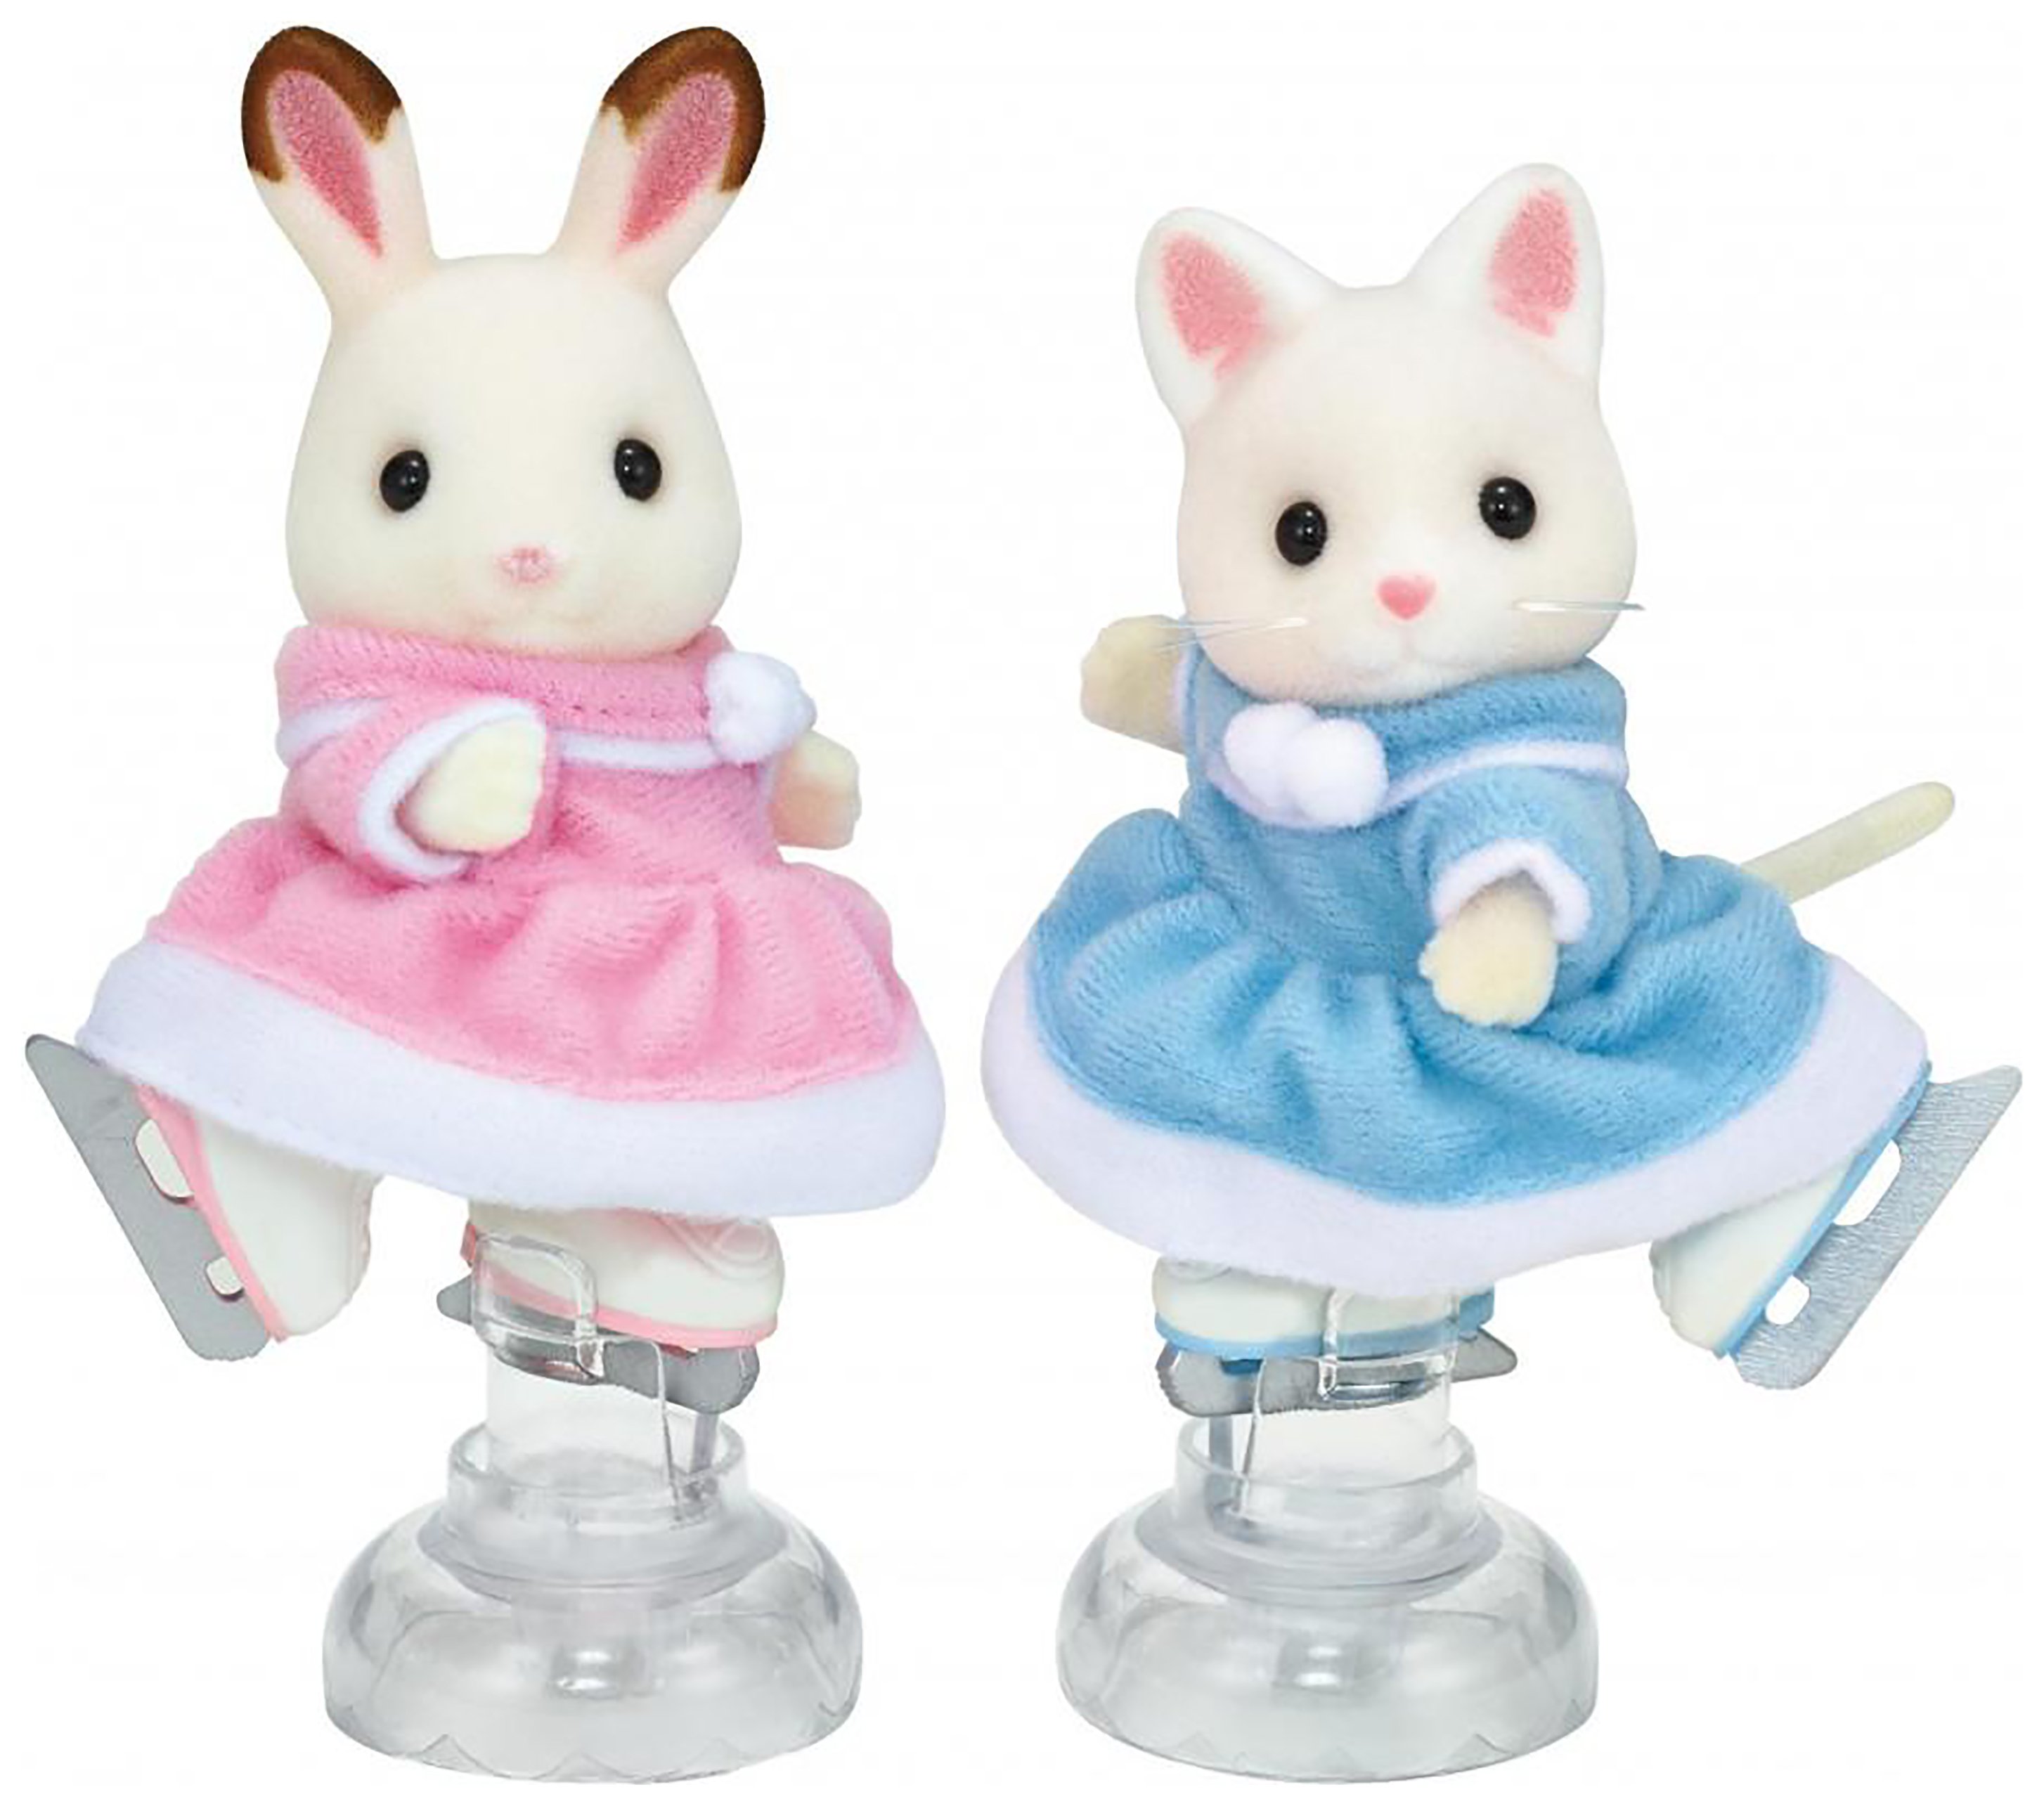 Sylvanian Families Ice Skating Friends Figures